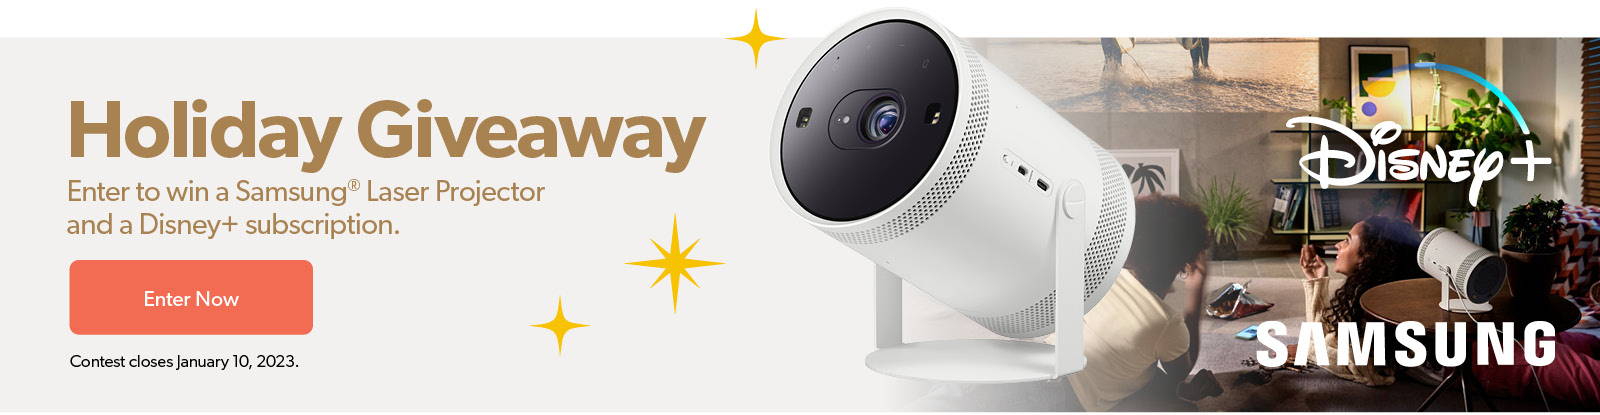 Holiday Giveaway Enter to win a Samsung Laser Projector and a Disney+ Subscription Contest Closes January 10, 2023